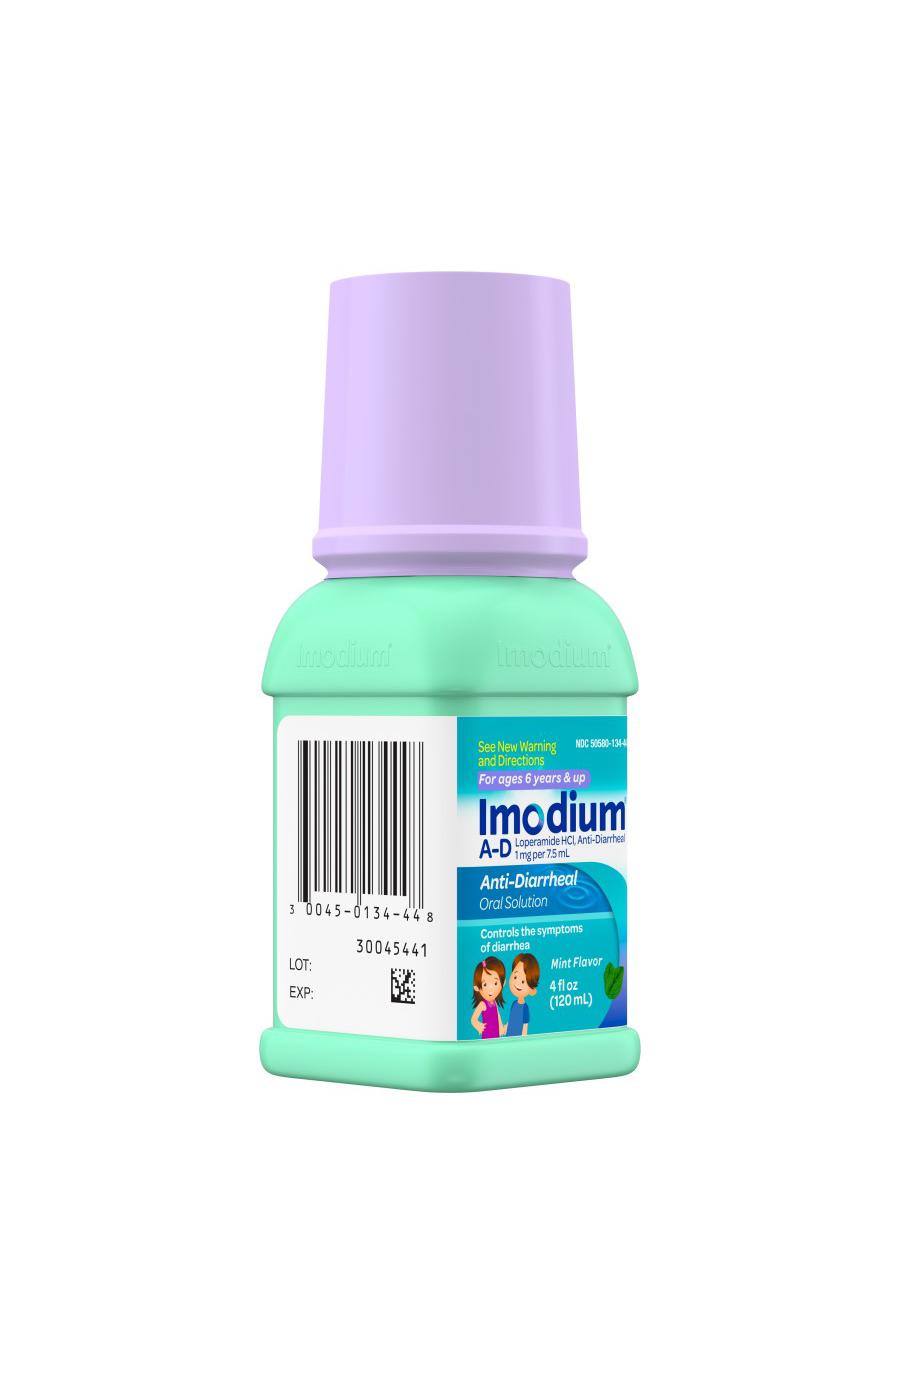 Imodium A-D Liquid For Use In Children; image 4 of 7